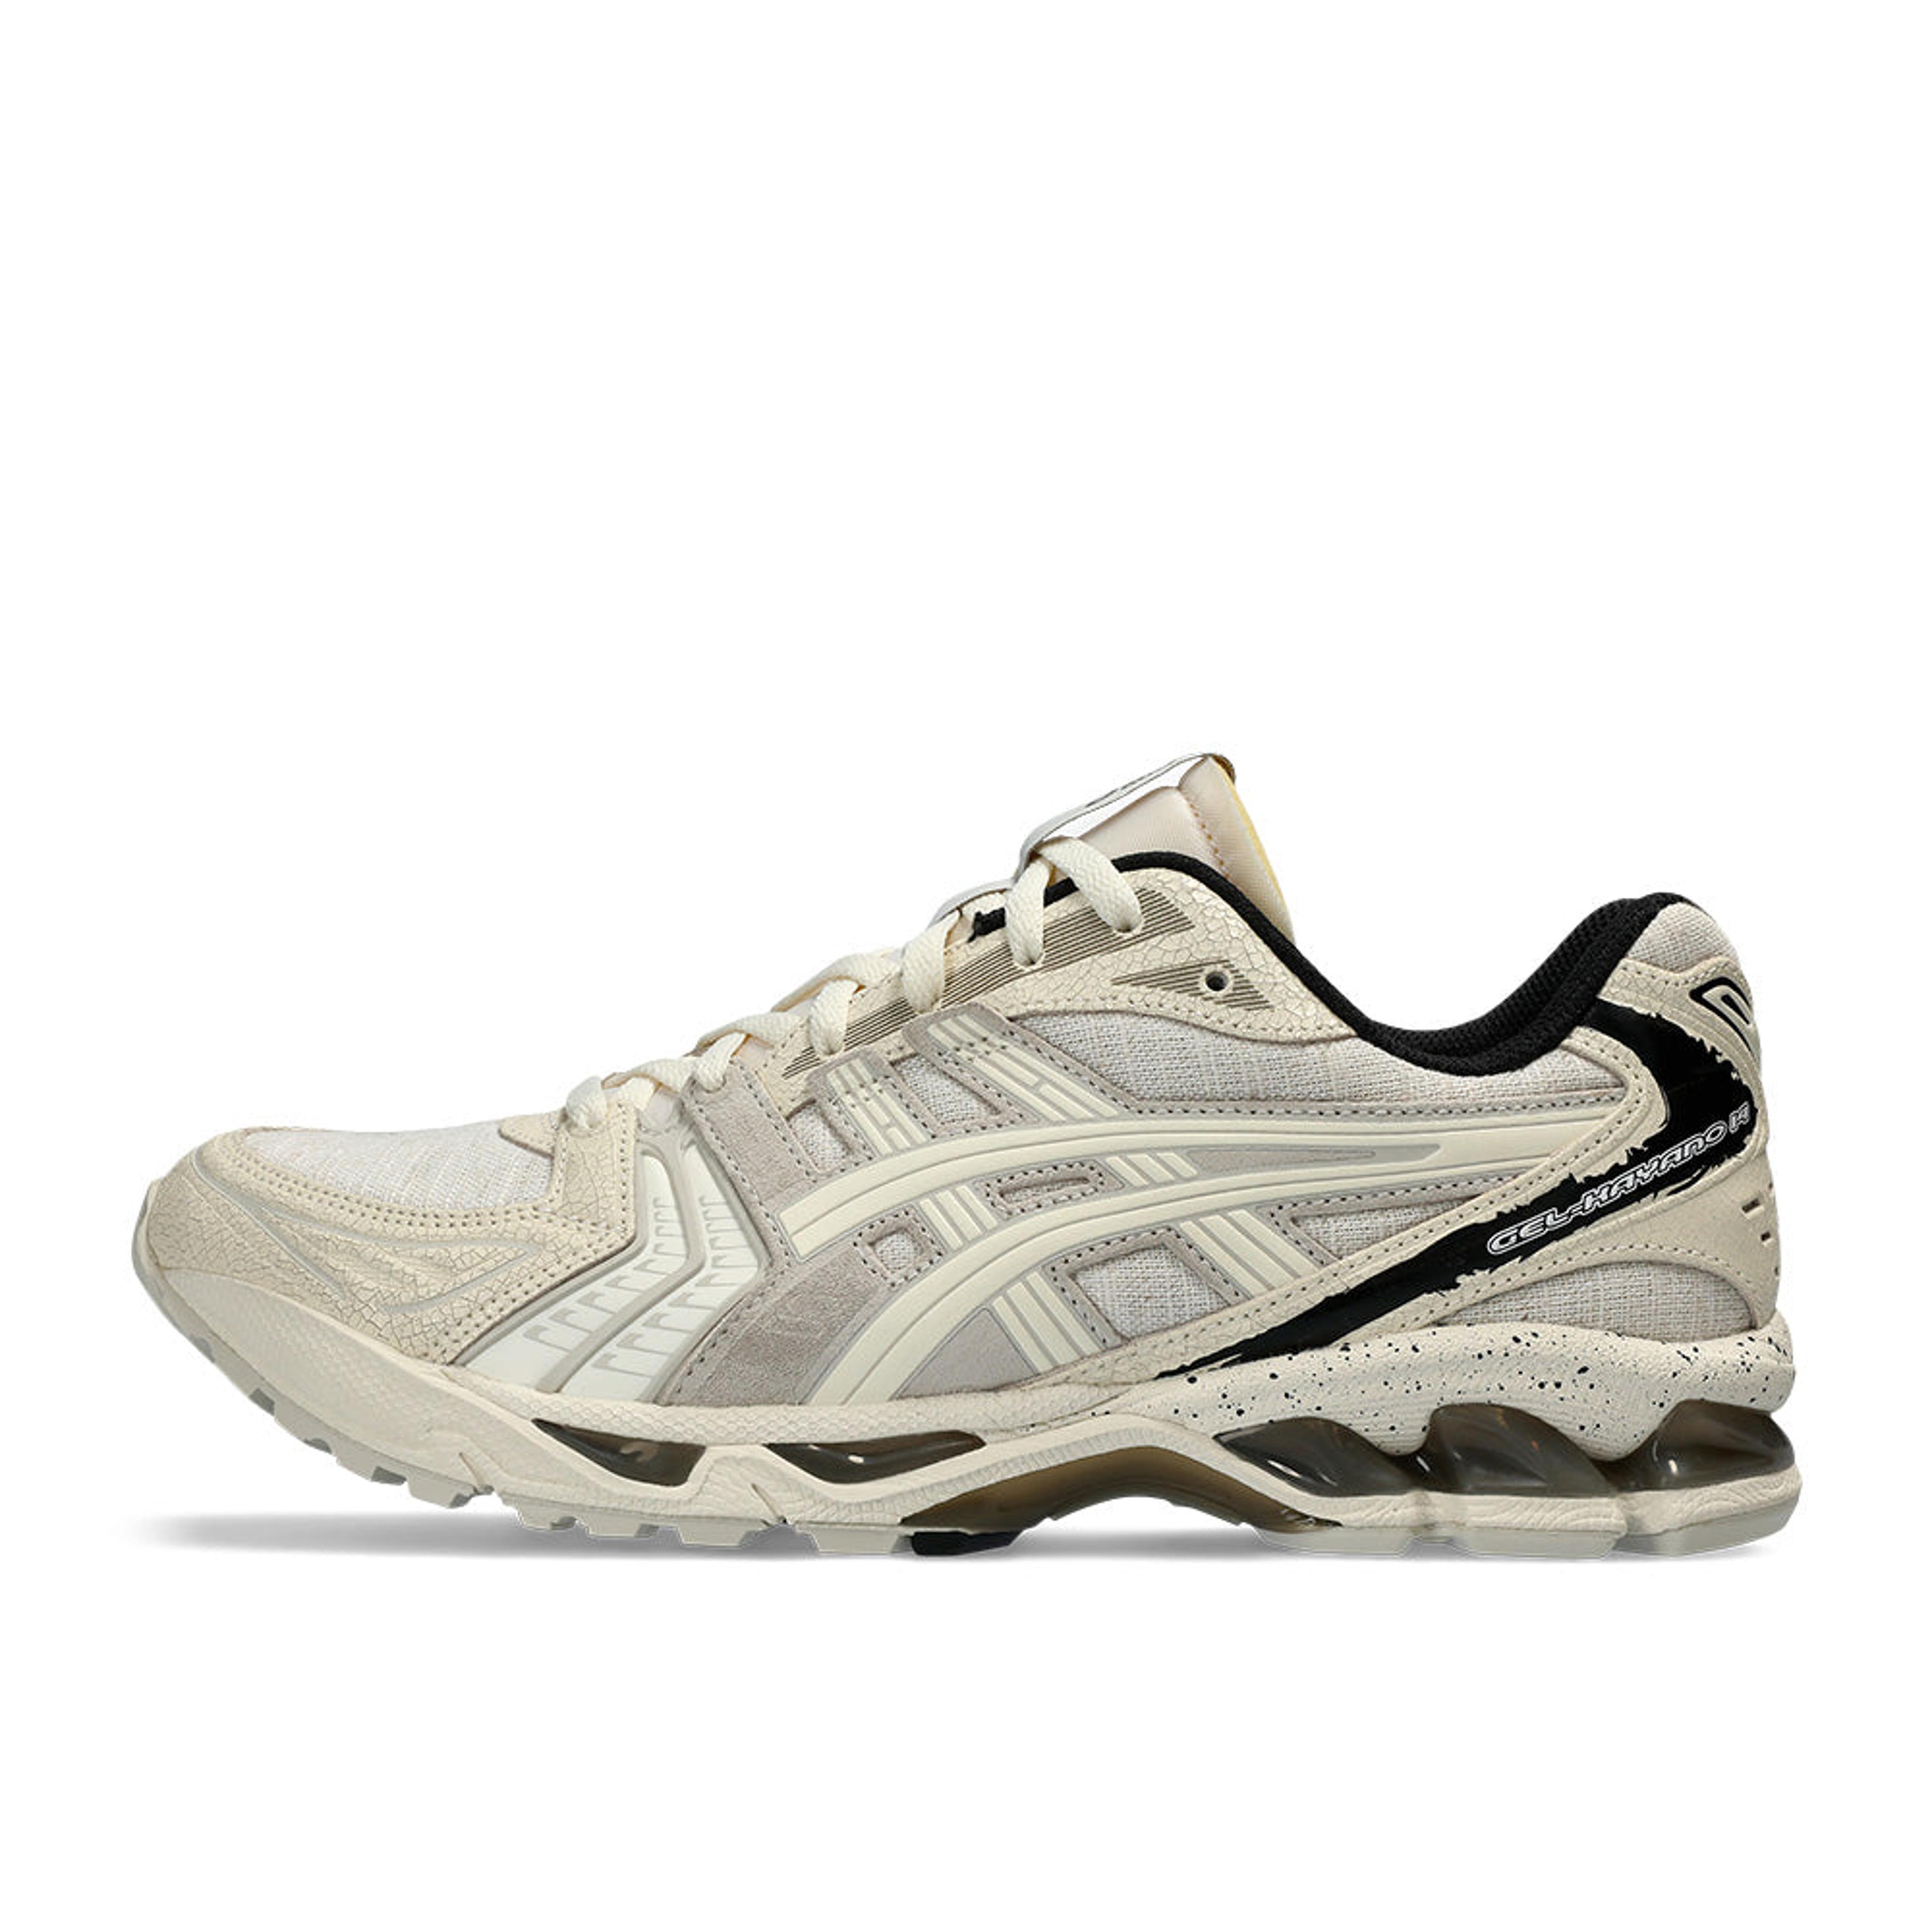 Alternate View 5 of Asics Gel-Kayano 14 "Imperfection" Pack